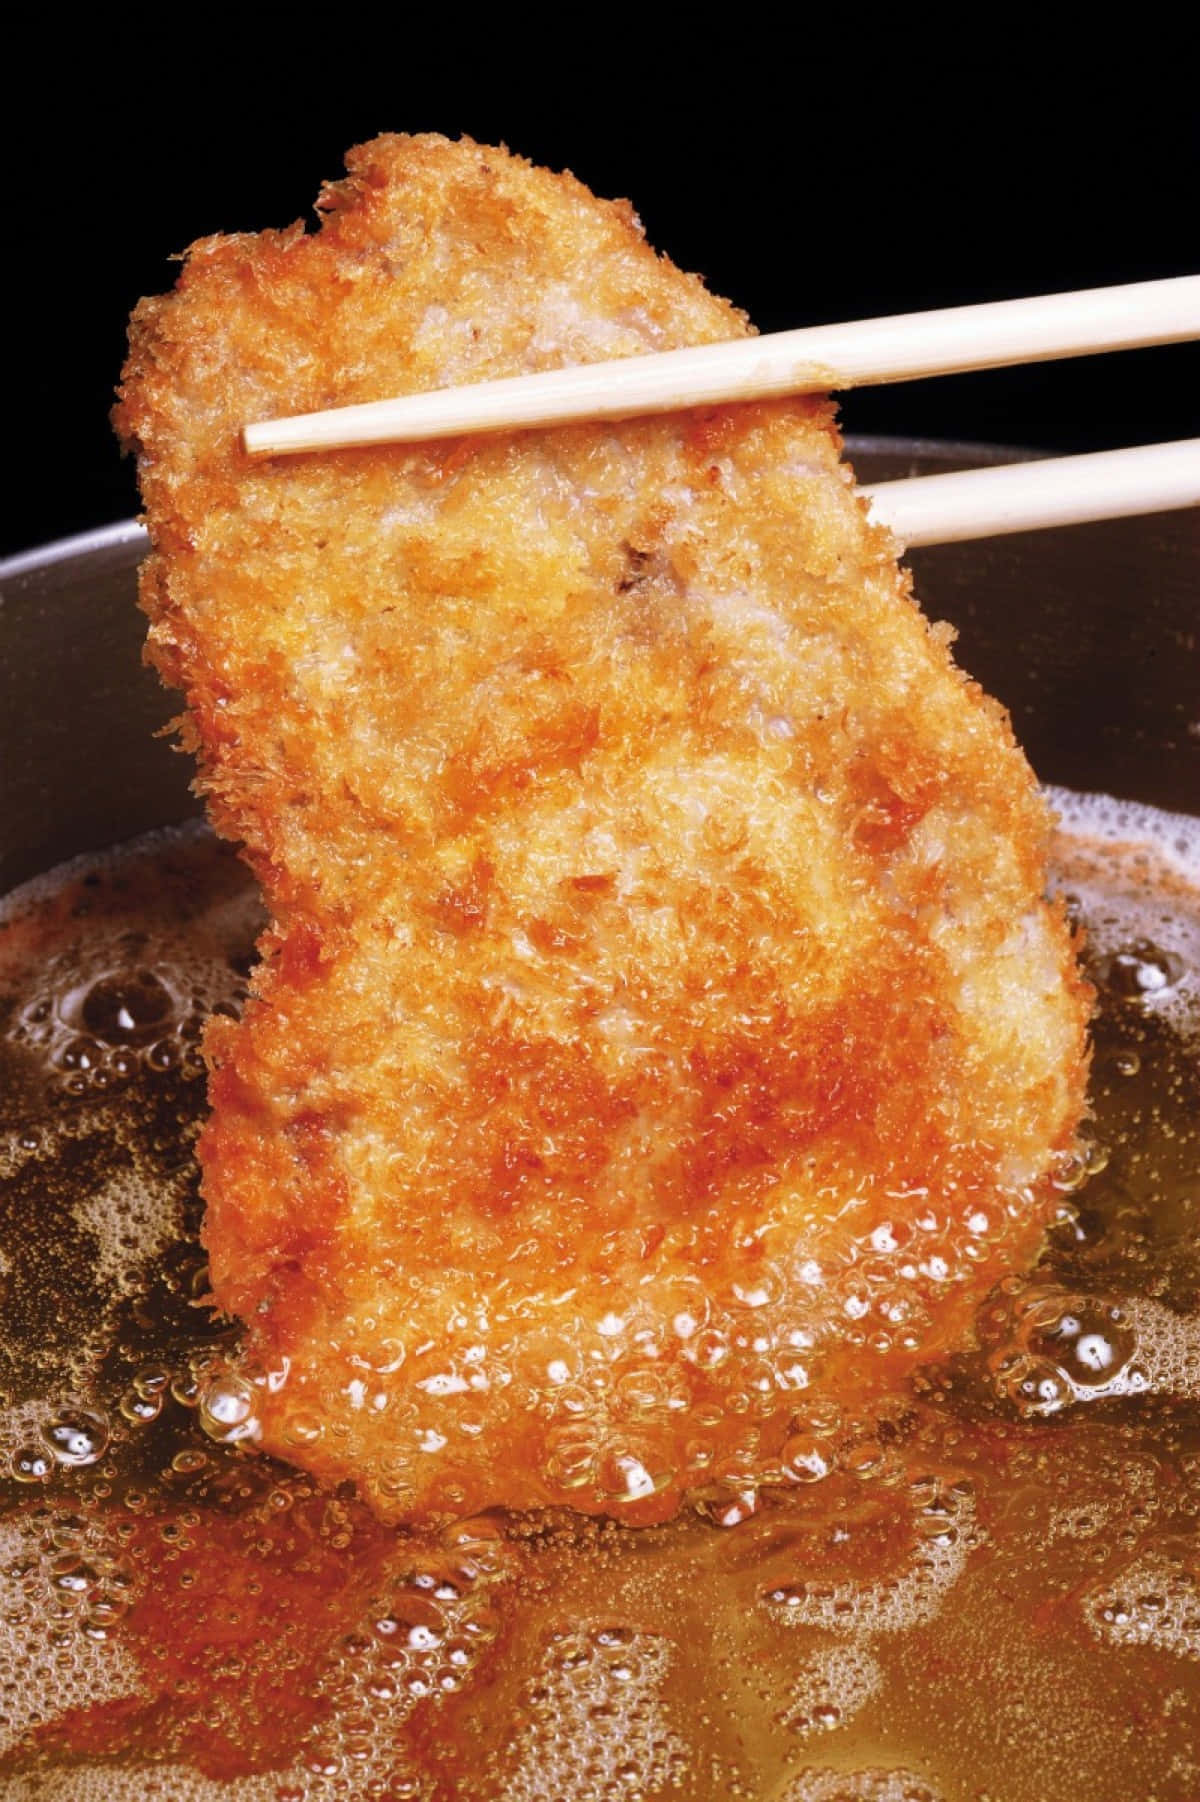 A Fried Chicken In A Pan